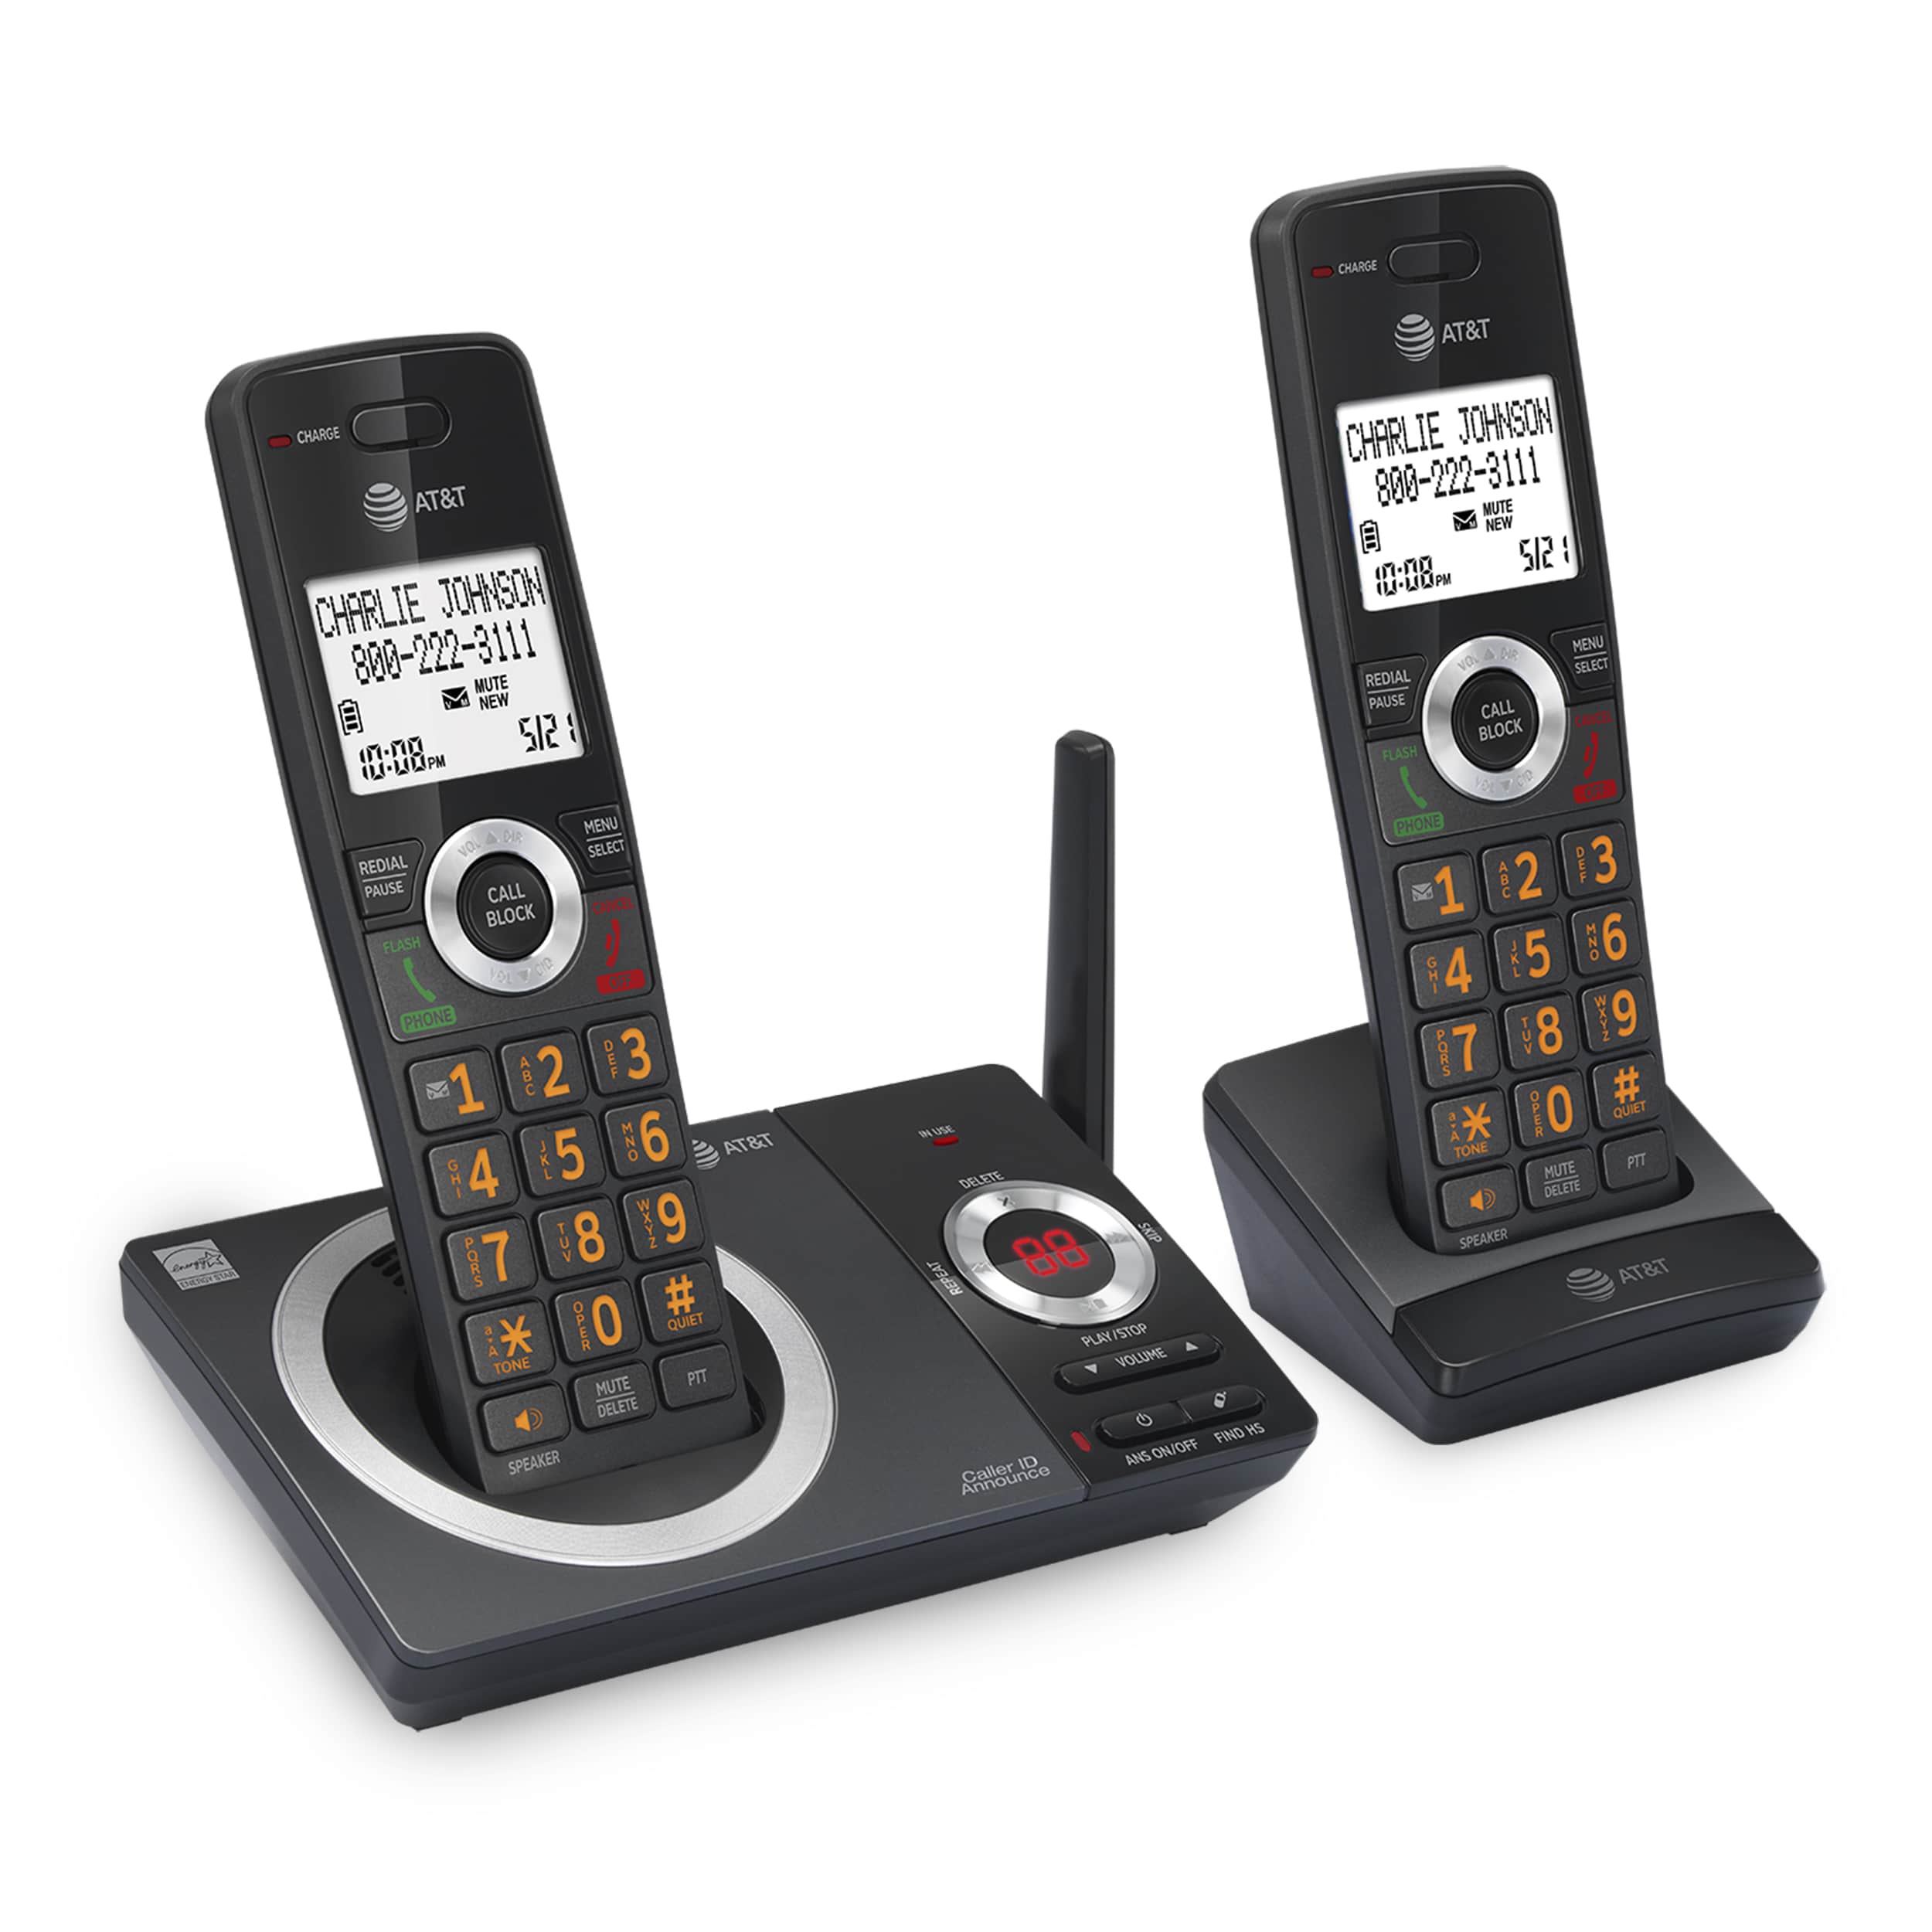 2-Handset Expandable Cordless Phone with Unsurpassed Range, Smart Call Blocker and Answering System - view 3